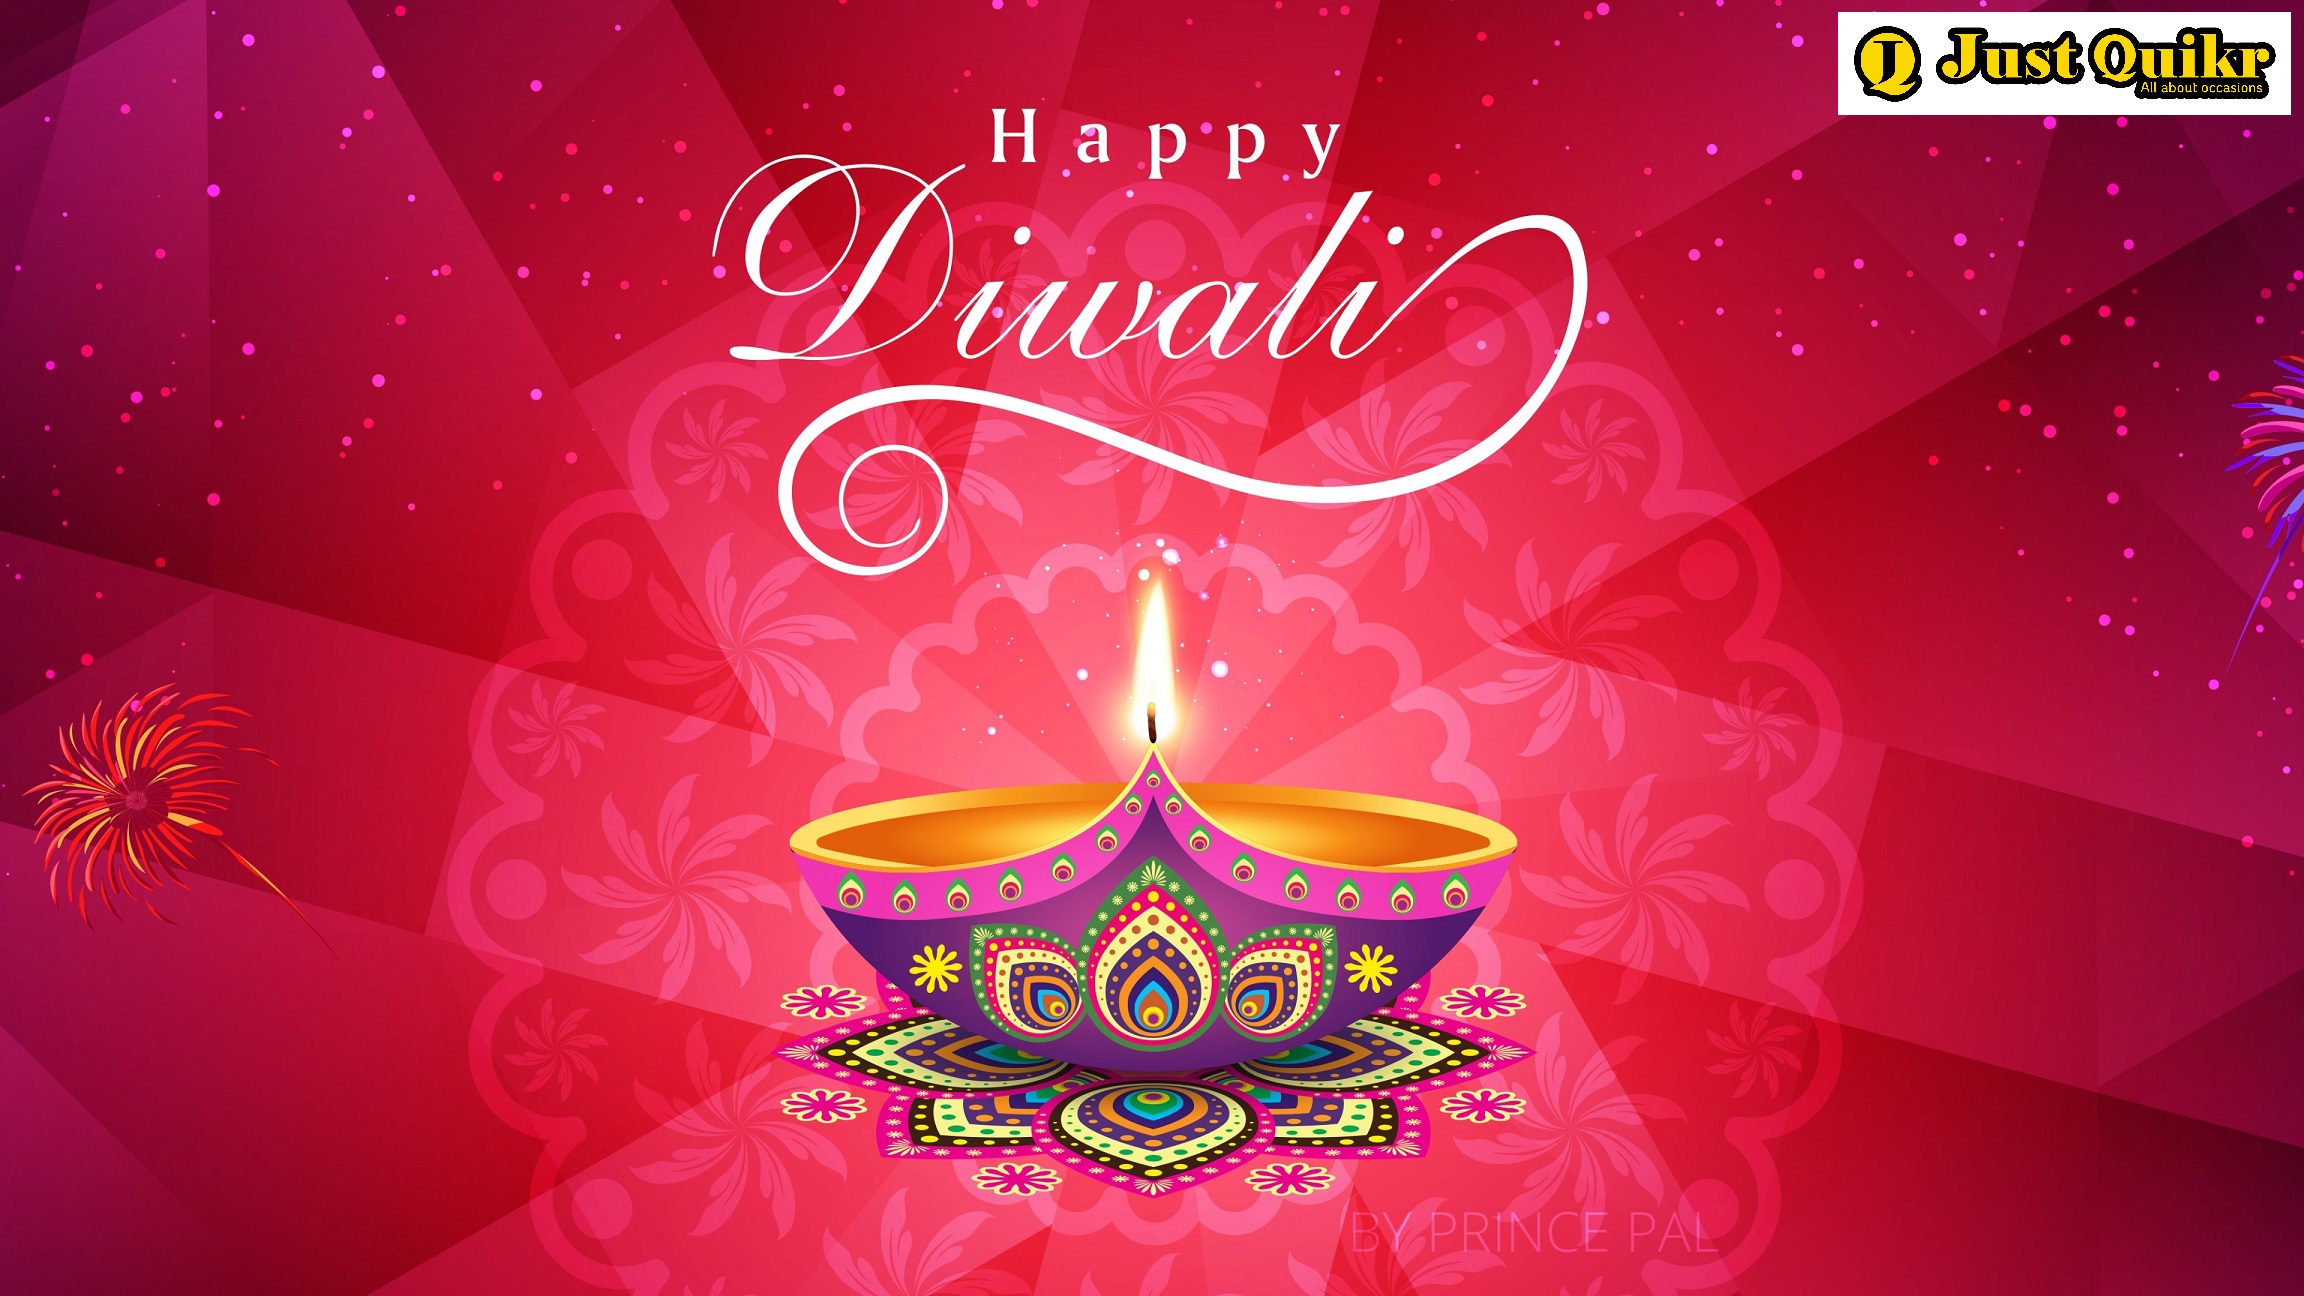 Happy Diwali HD Images Pictures Wallpapers 2021